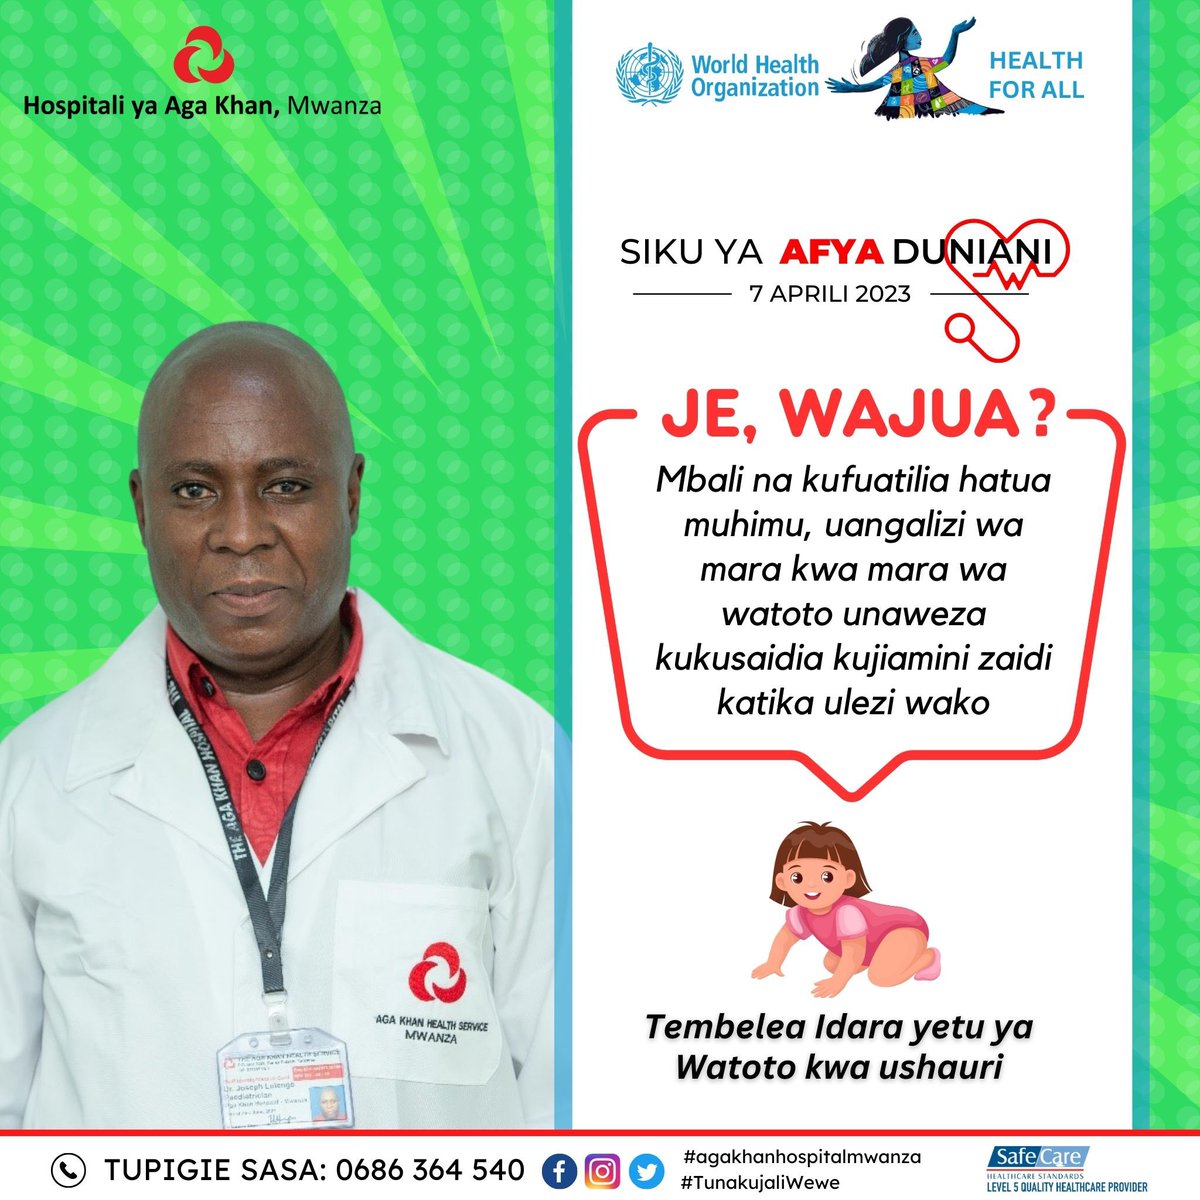 Regular pediatric care enables you to keep your child healthy and safe. Make an appointment today to see our Pediatrician, Dr. Joseph M. Lulengo via 0686 364 540.

#agakhanhospitalmwanza #worldhealthday #WHD2023  #childcare #paediatriccare #paediatricians #mwanza #tanzania